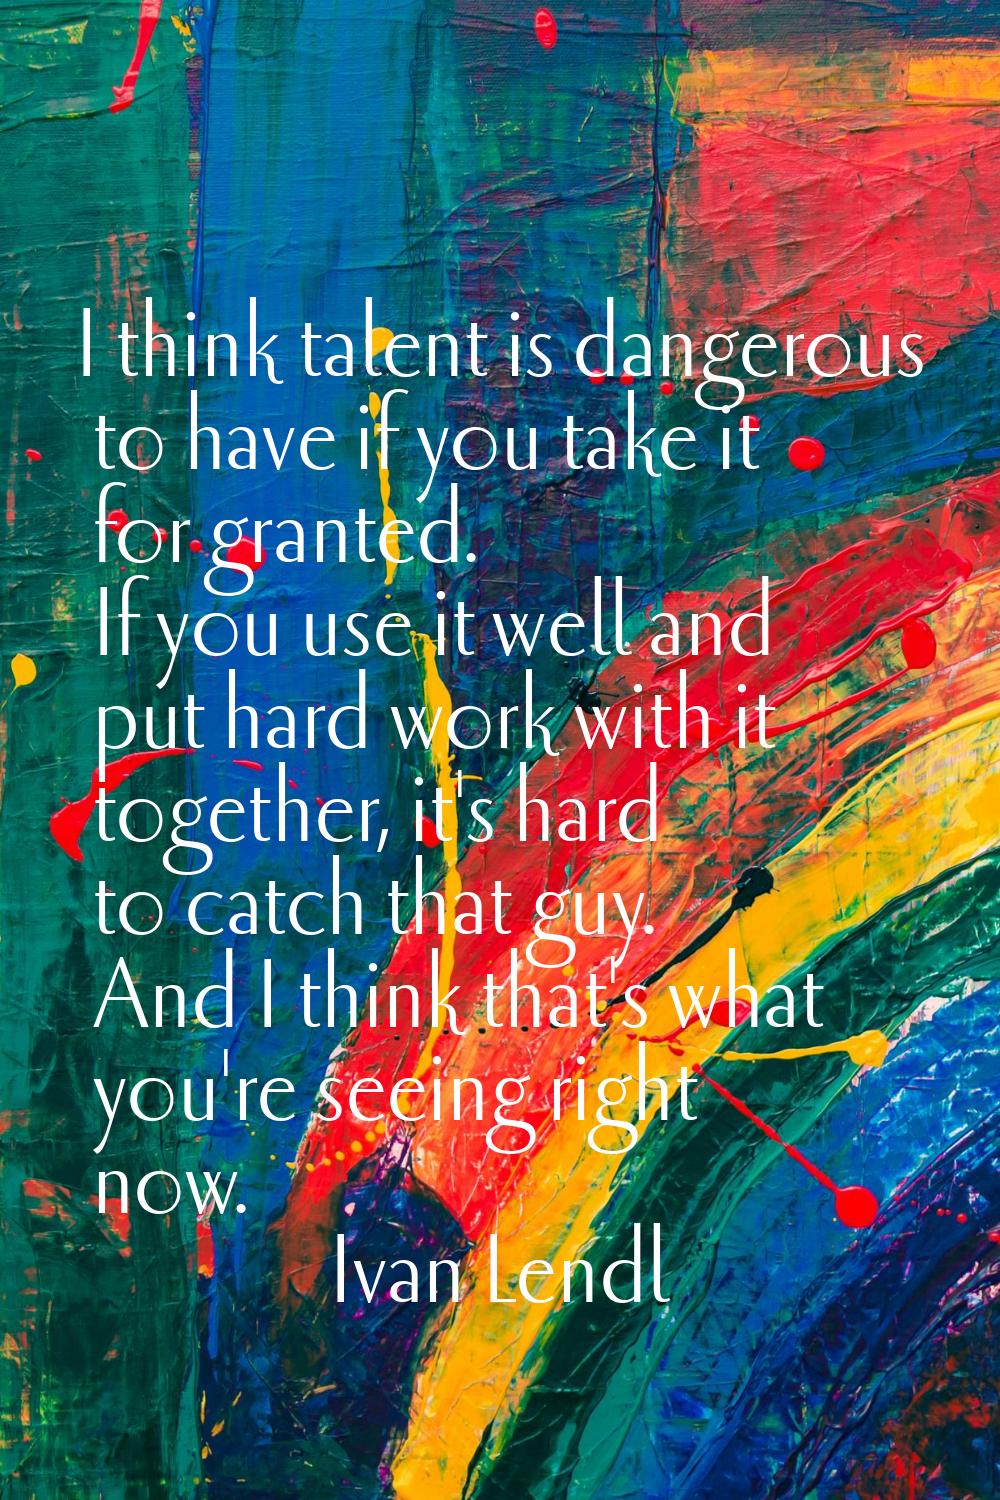 I think talent is dangerous to have if you take it for granted. If you use it well and put hard wor